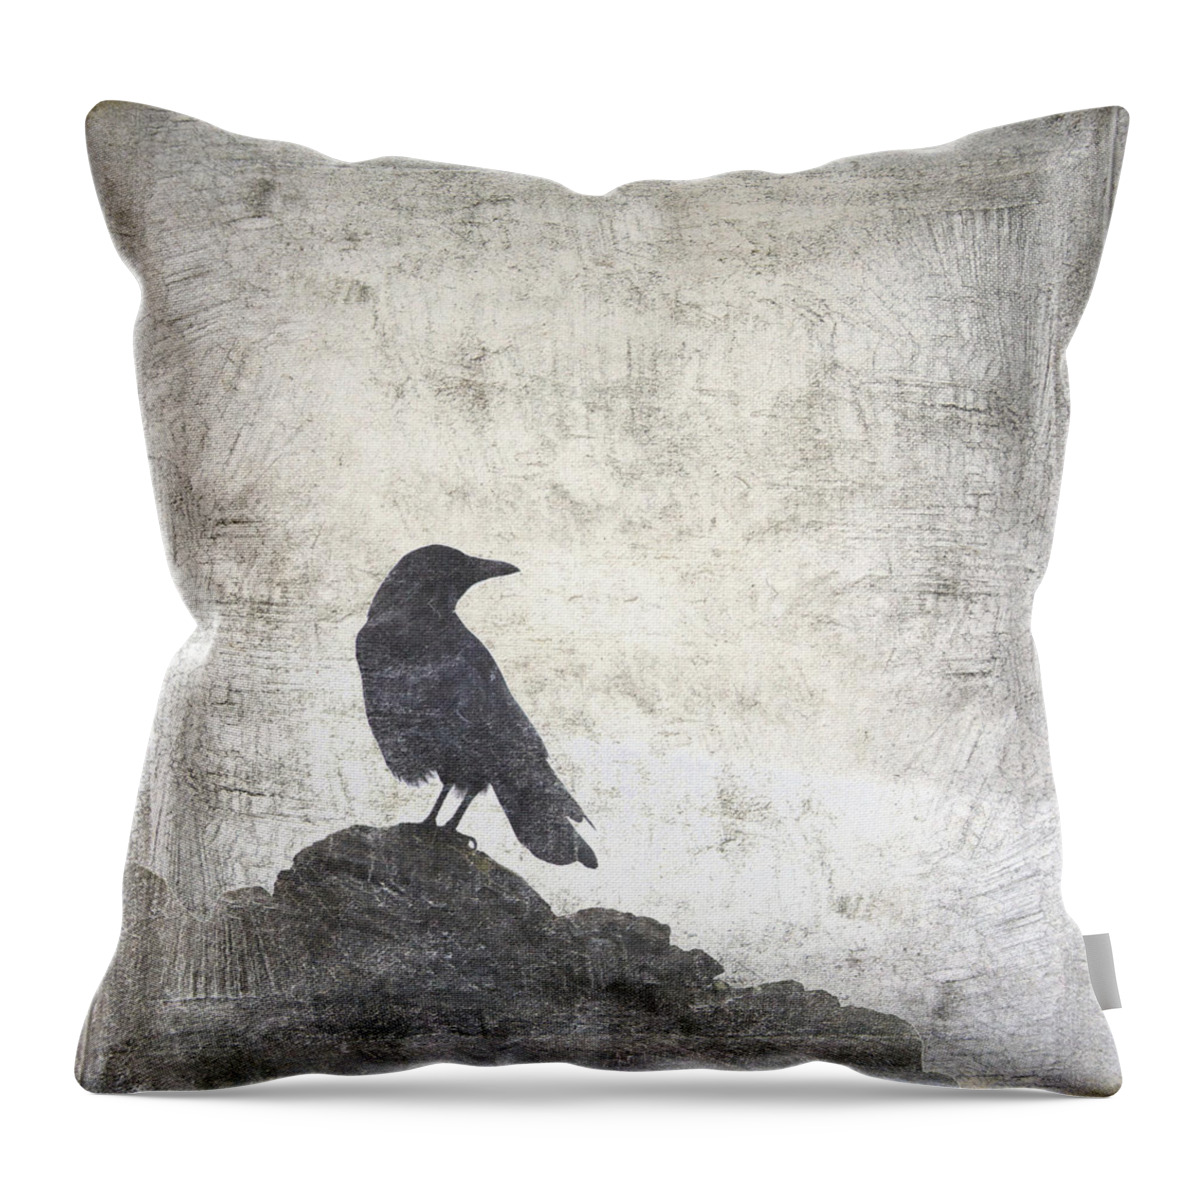 Crow Throw Pillow featuring the photograph Looking Seaward by Carol Leigh